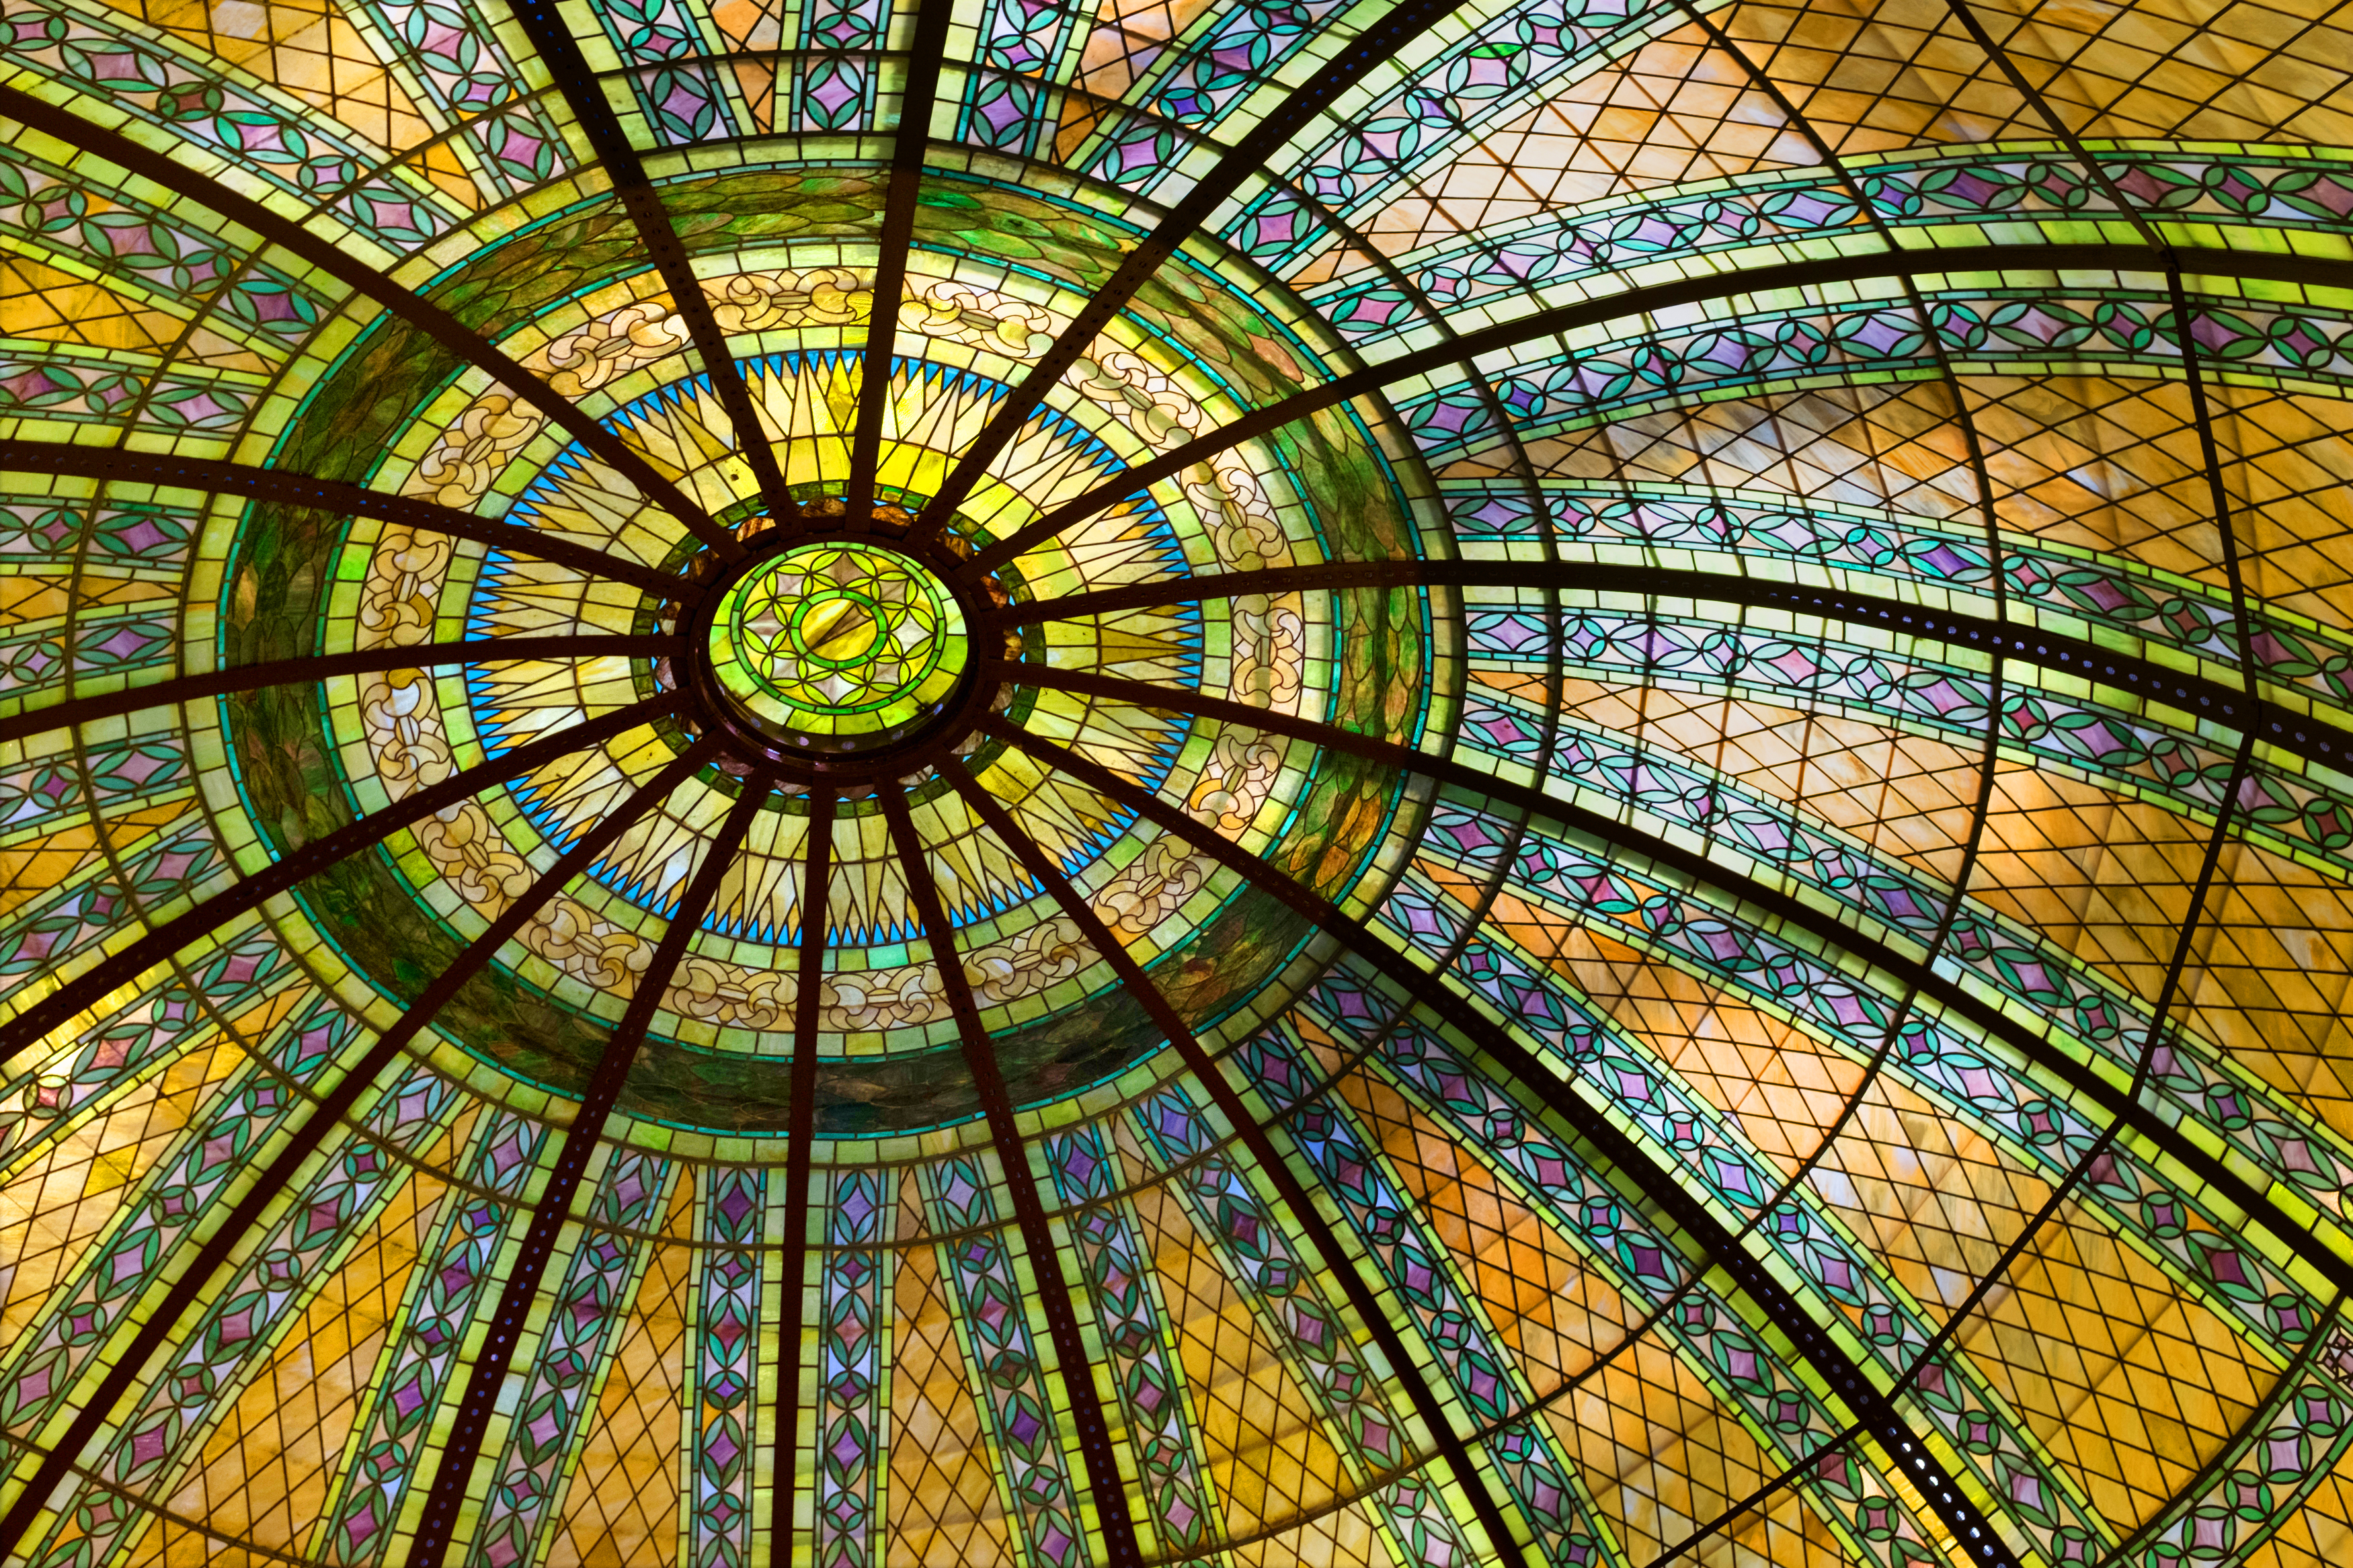 DAMIAN MULINIX The stained glass dome of the historic Pacific County courthouse in South Bend.